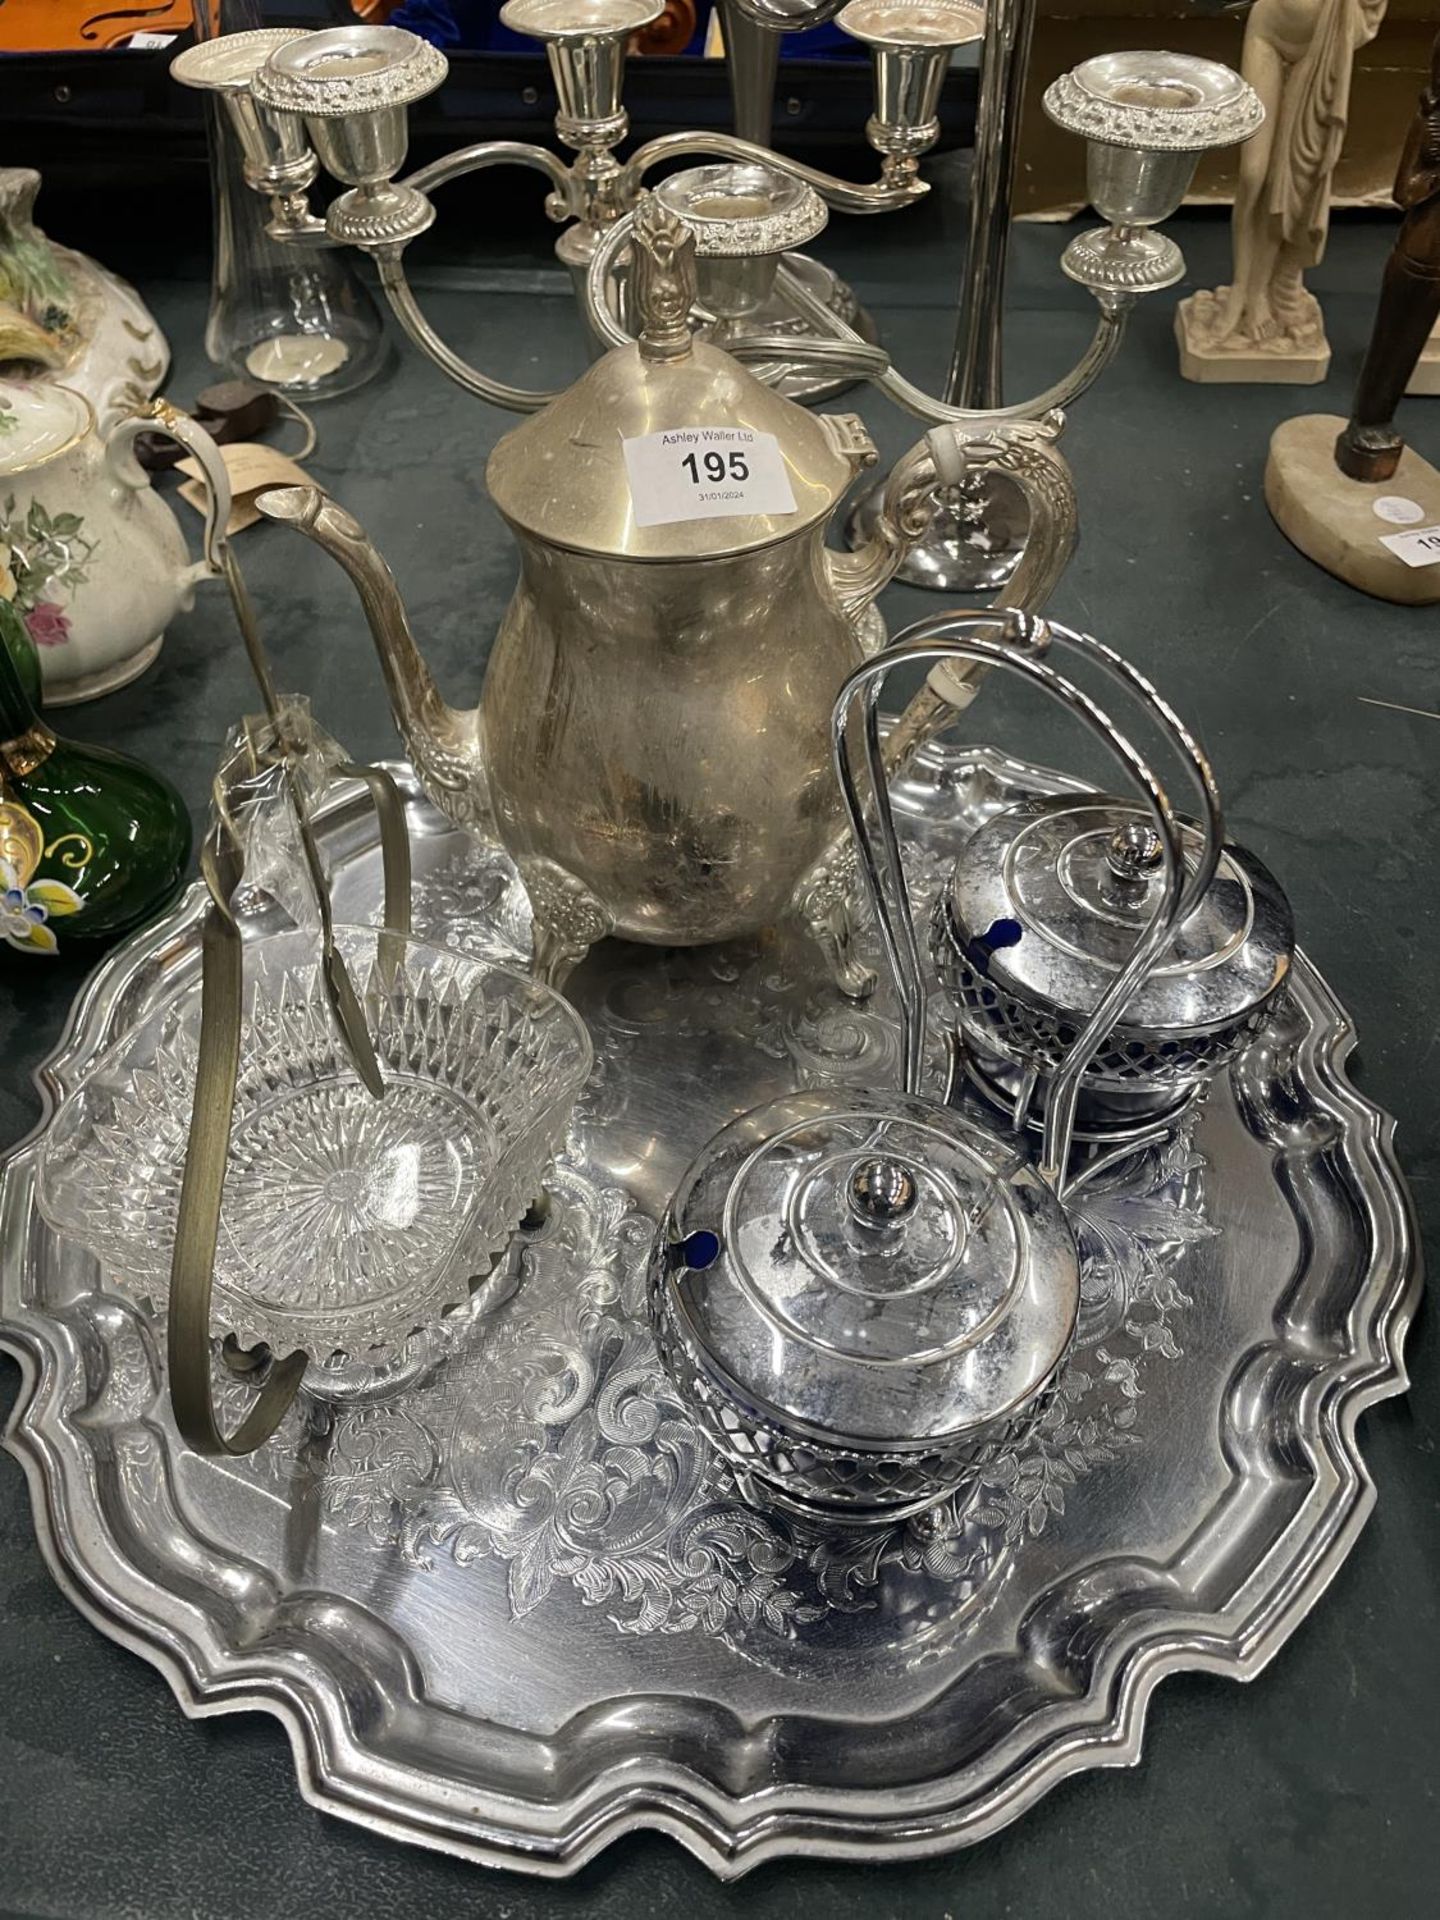 A QUANTITY OF SILVER PLATED ITEMS TO INCLUDE CANDLEABRAS, A COFFEE POT, PRESERVE POTS, A TRAY, ETC - Image 2 of 4